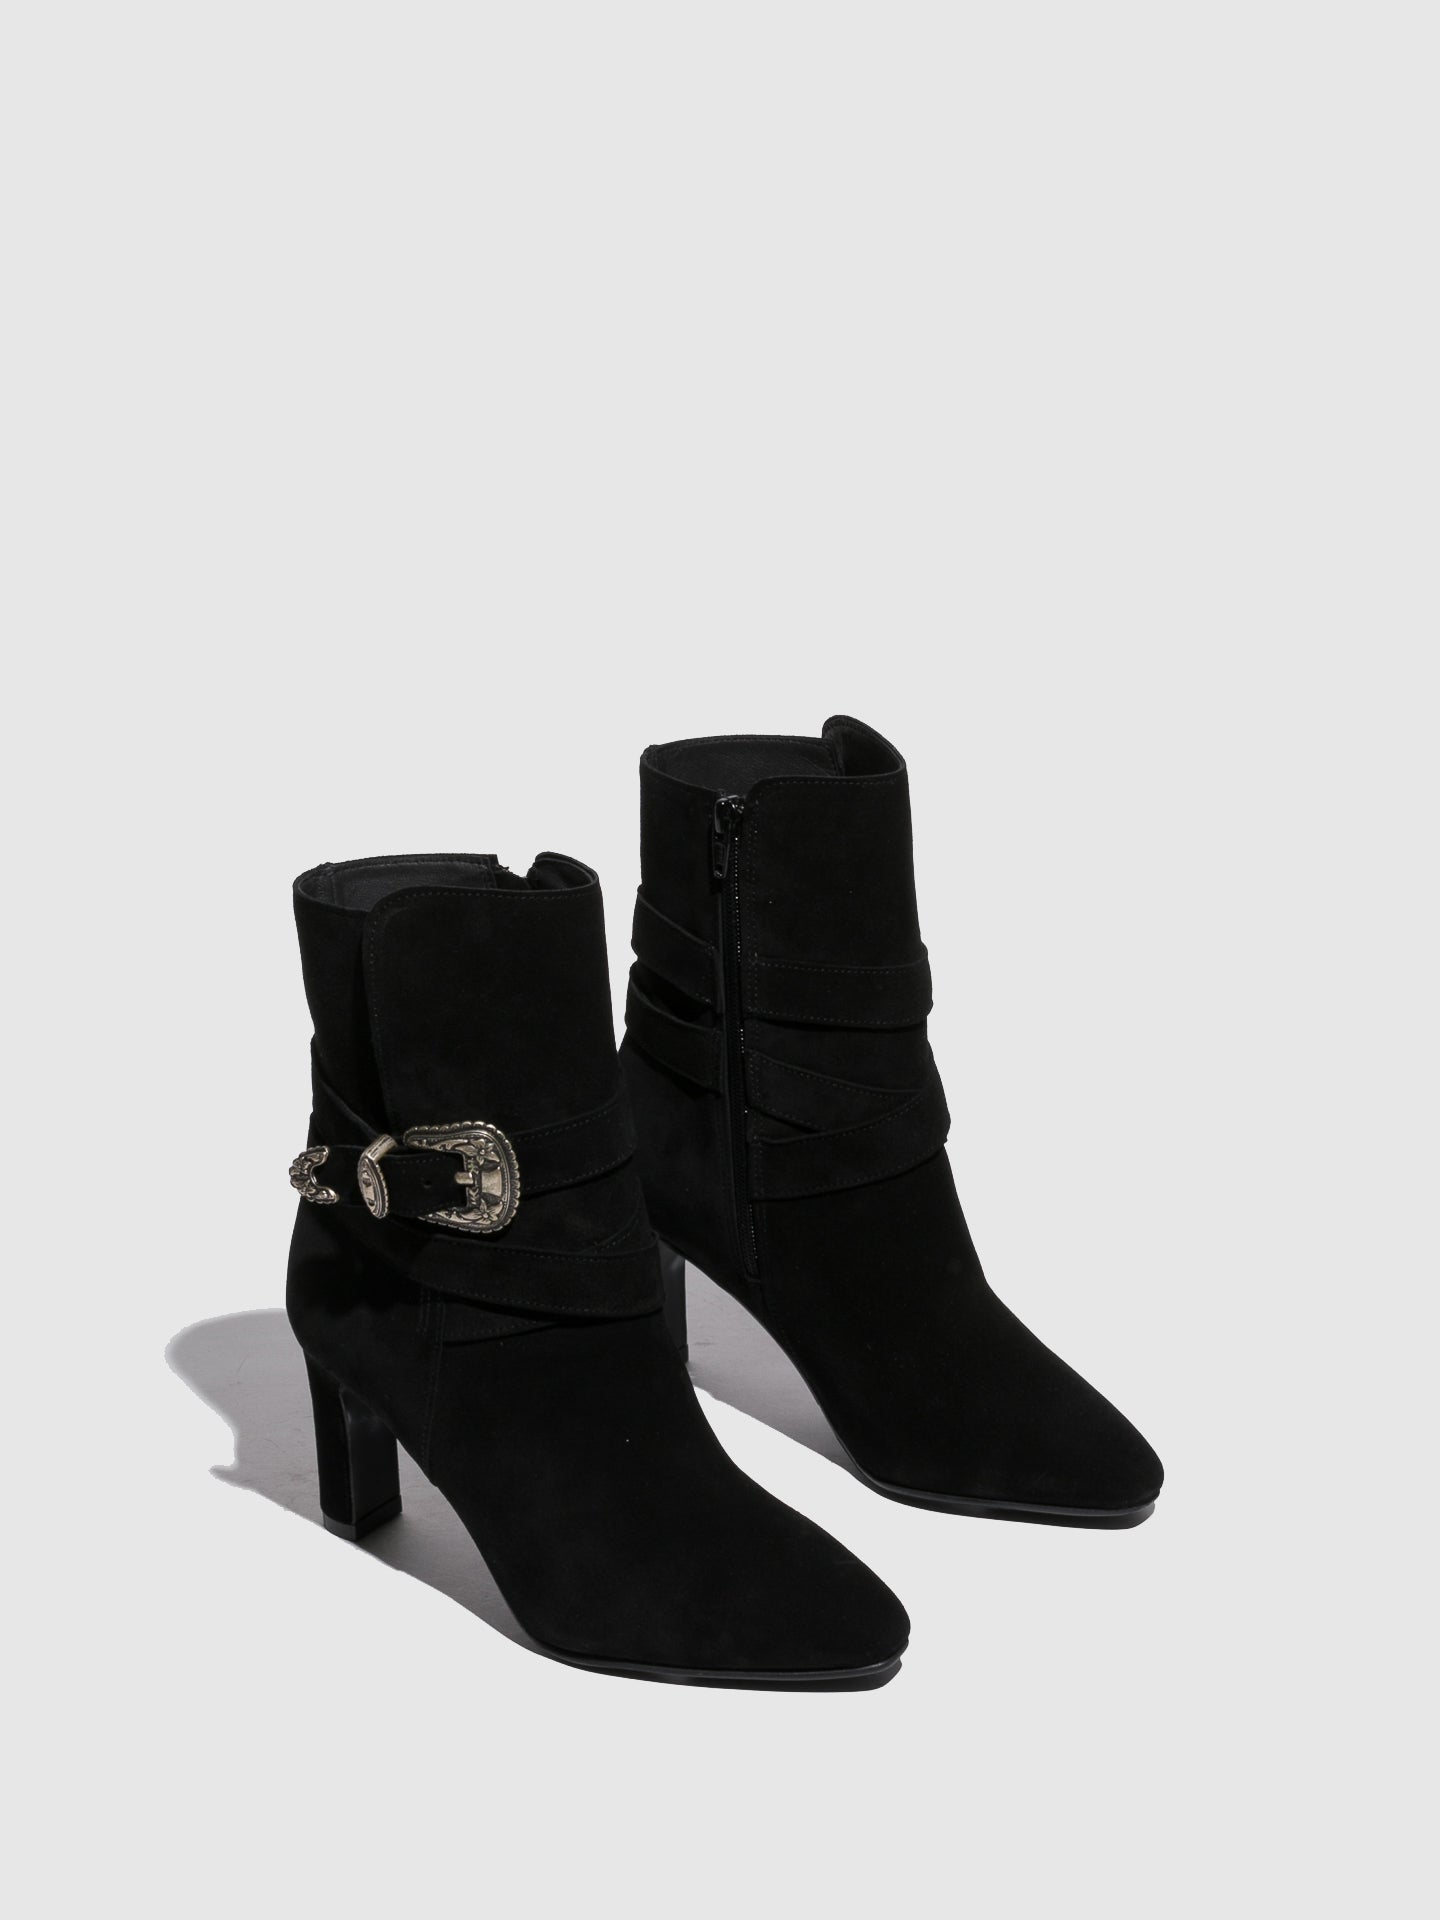 Foreva Black Buckle Boots